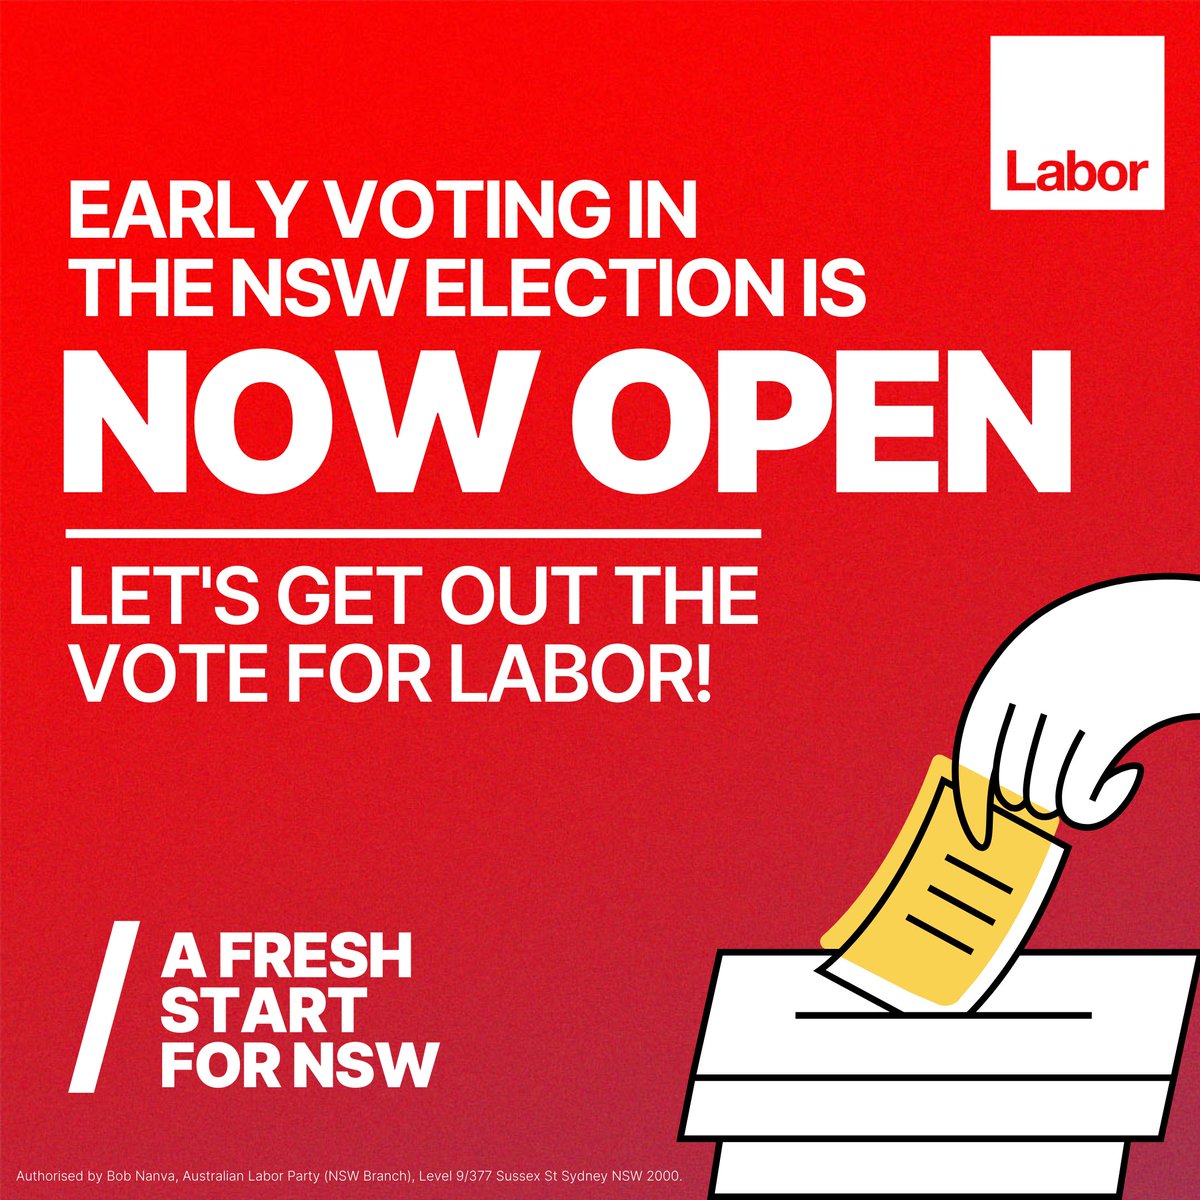 NSW Labor: IT’S TIME TO VOTE LABOR  Find out how to vote for your local Labo…